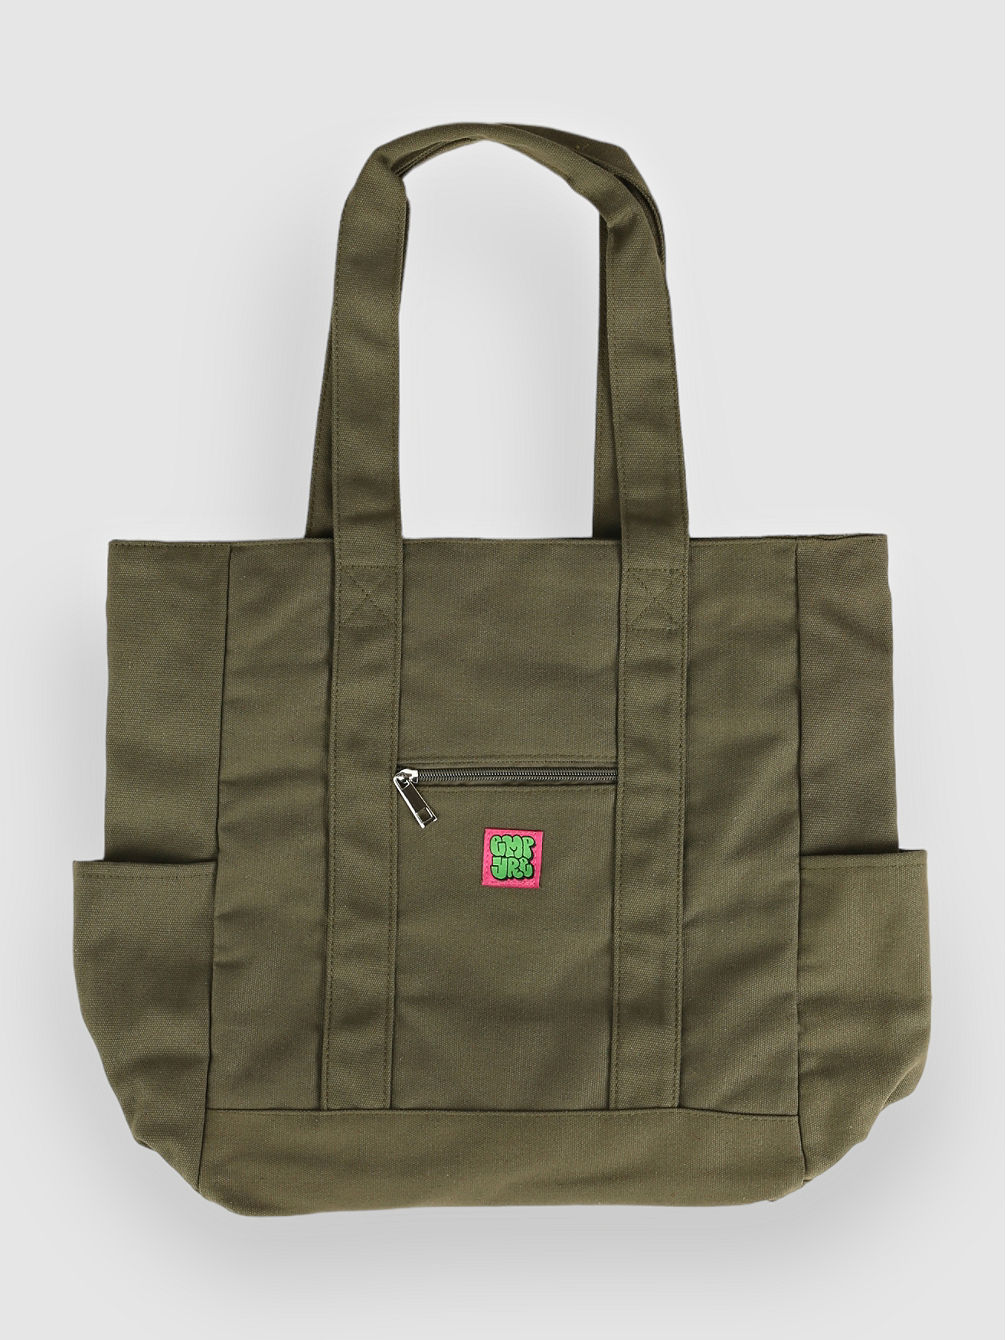 Match Tote Sac &agrave; Mains